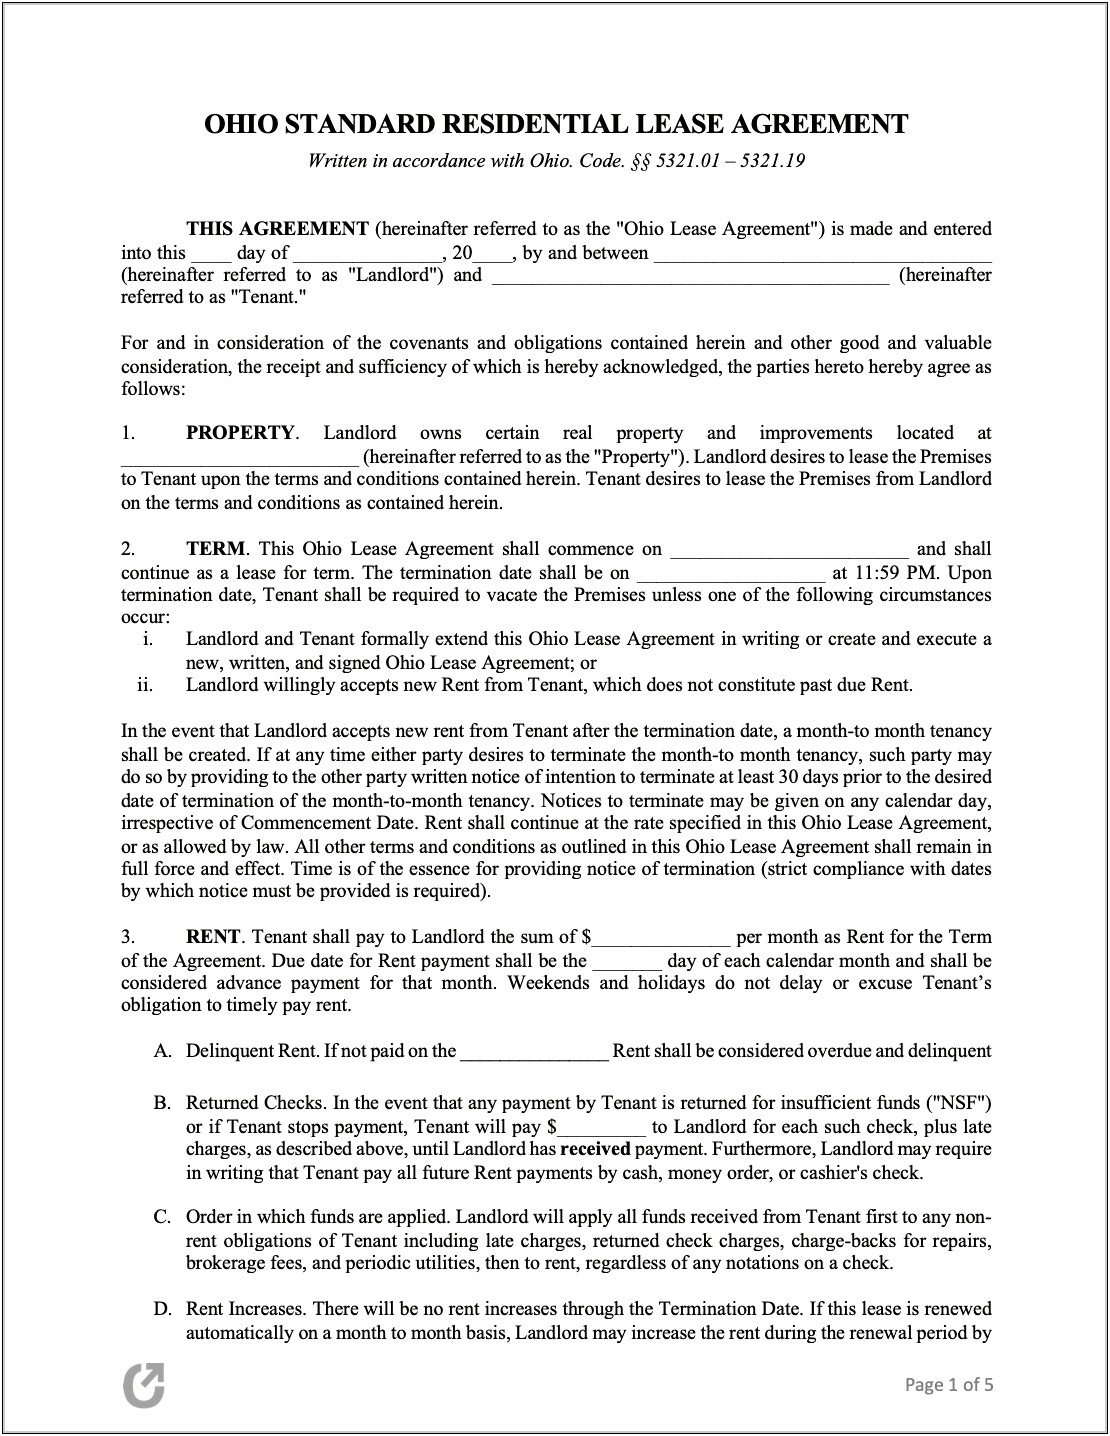 Free Apartment Rental Lease Agreement Templates